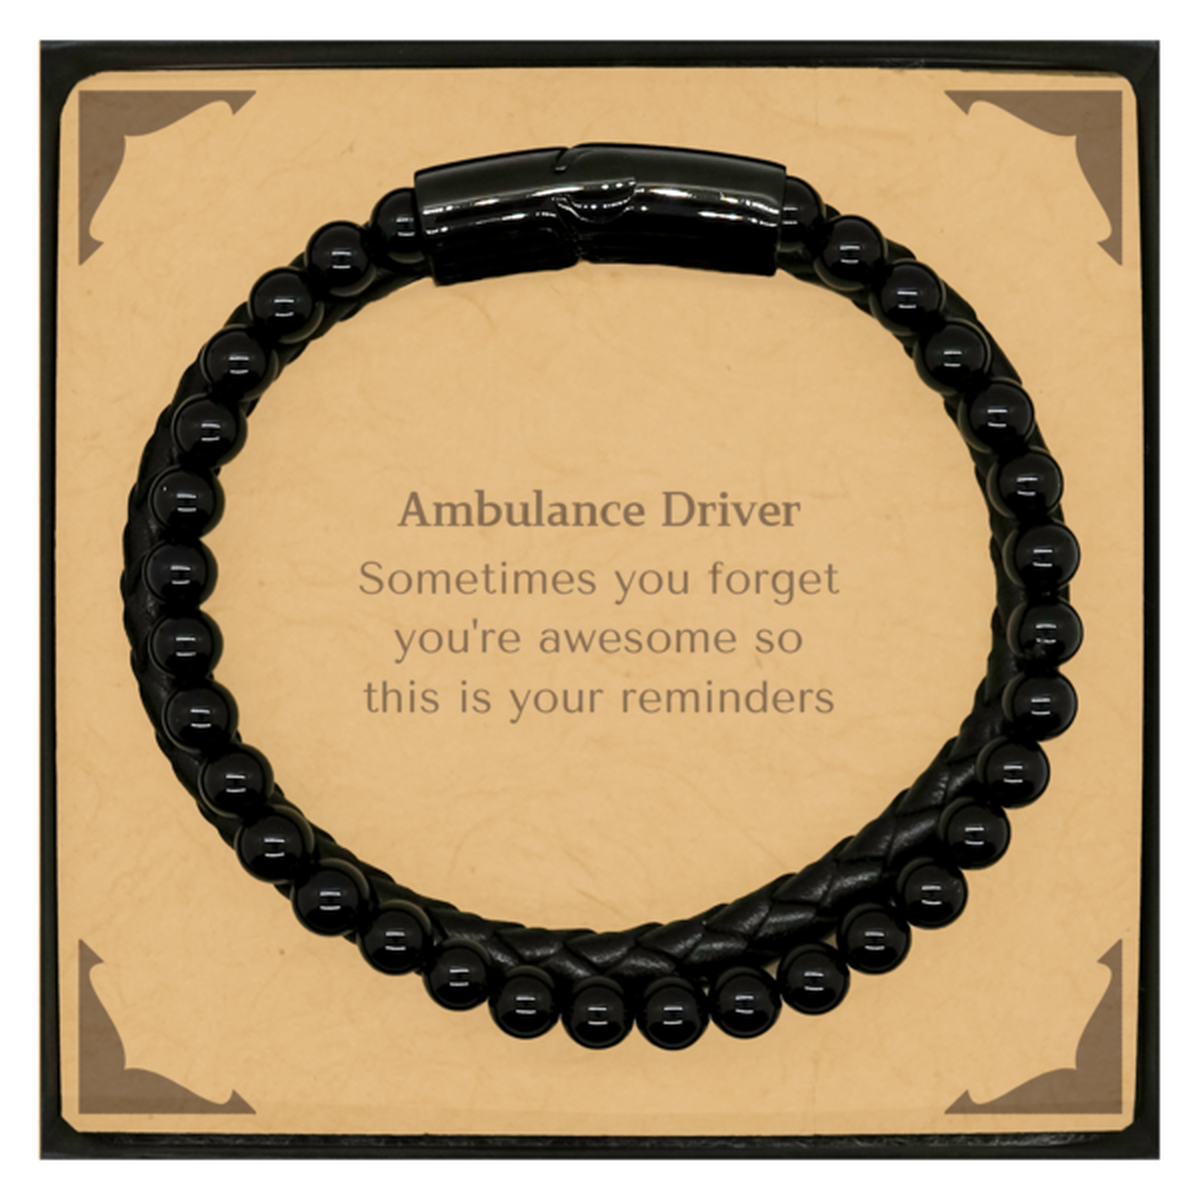 Sentimental Ambulance Driver Stone Leather Bracelets, Ambulance Driver Sometimes you forget you're awesome so this is your reminders, Graduation Christmas Birthday Gifts for Ambulance Driver, Men, Women, Coworkers